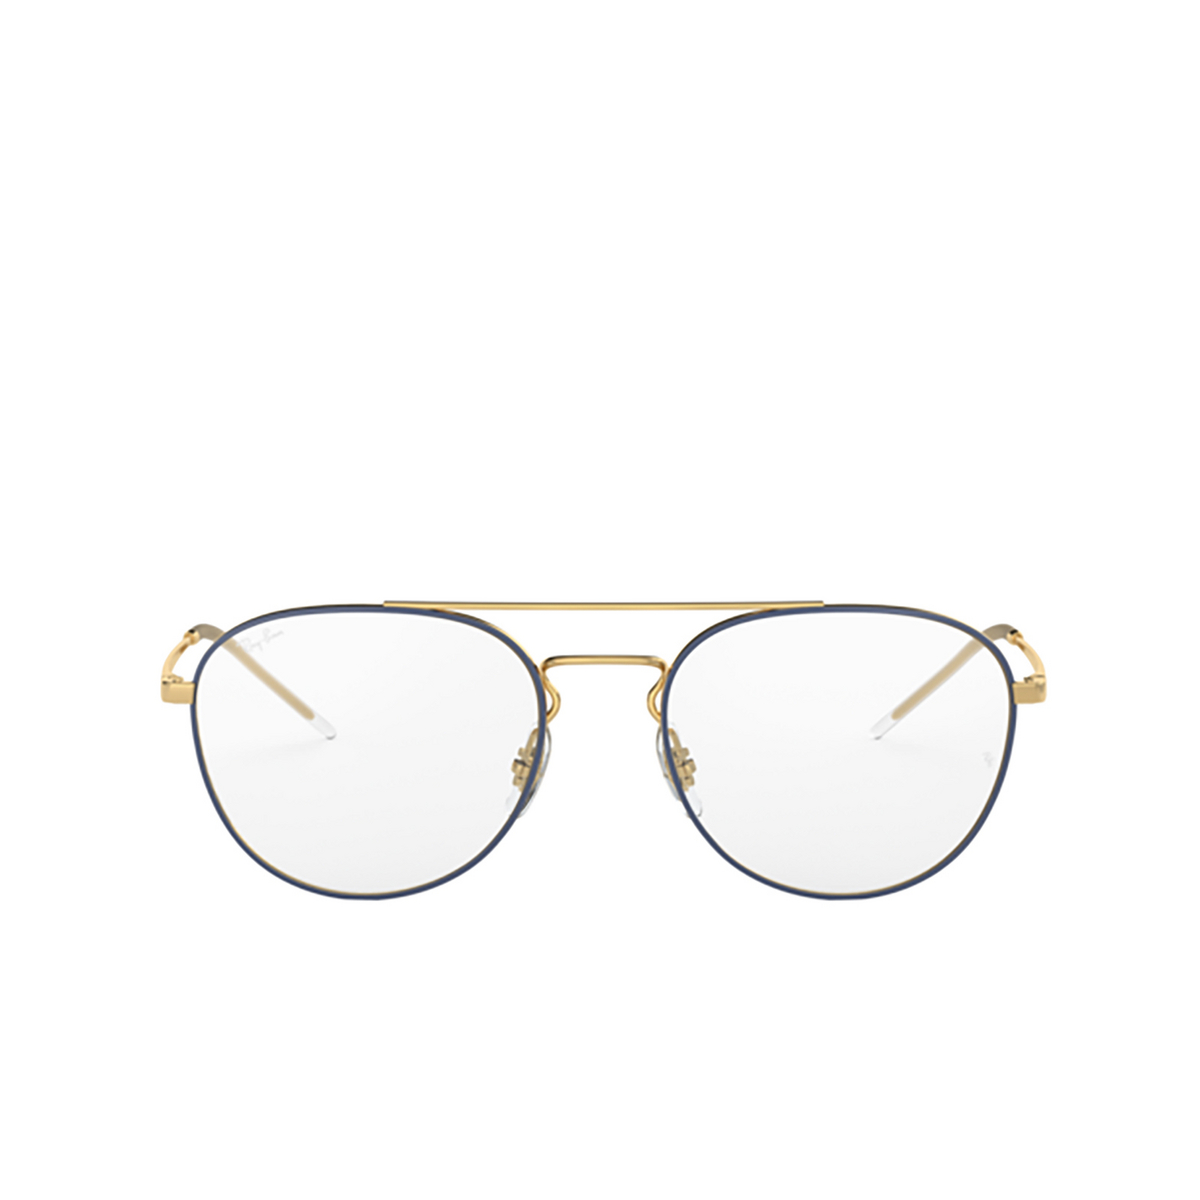 Ray-Ban® Aviator Eyeglasses: RX6414 color Gold Top Blue 2979 - front view.